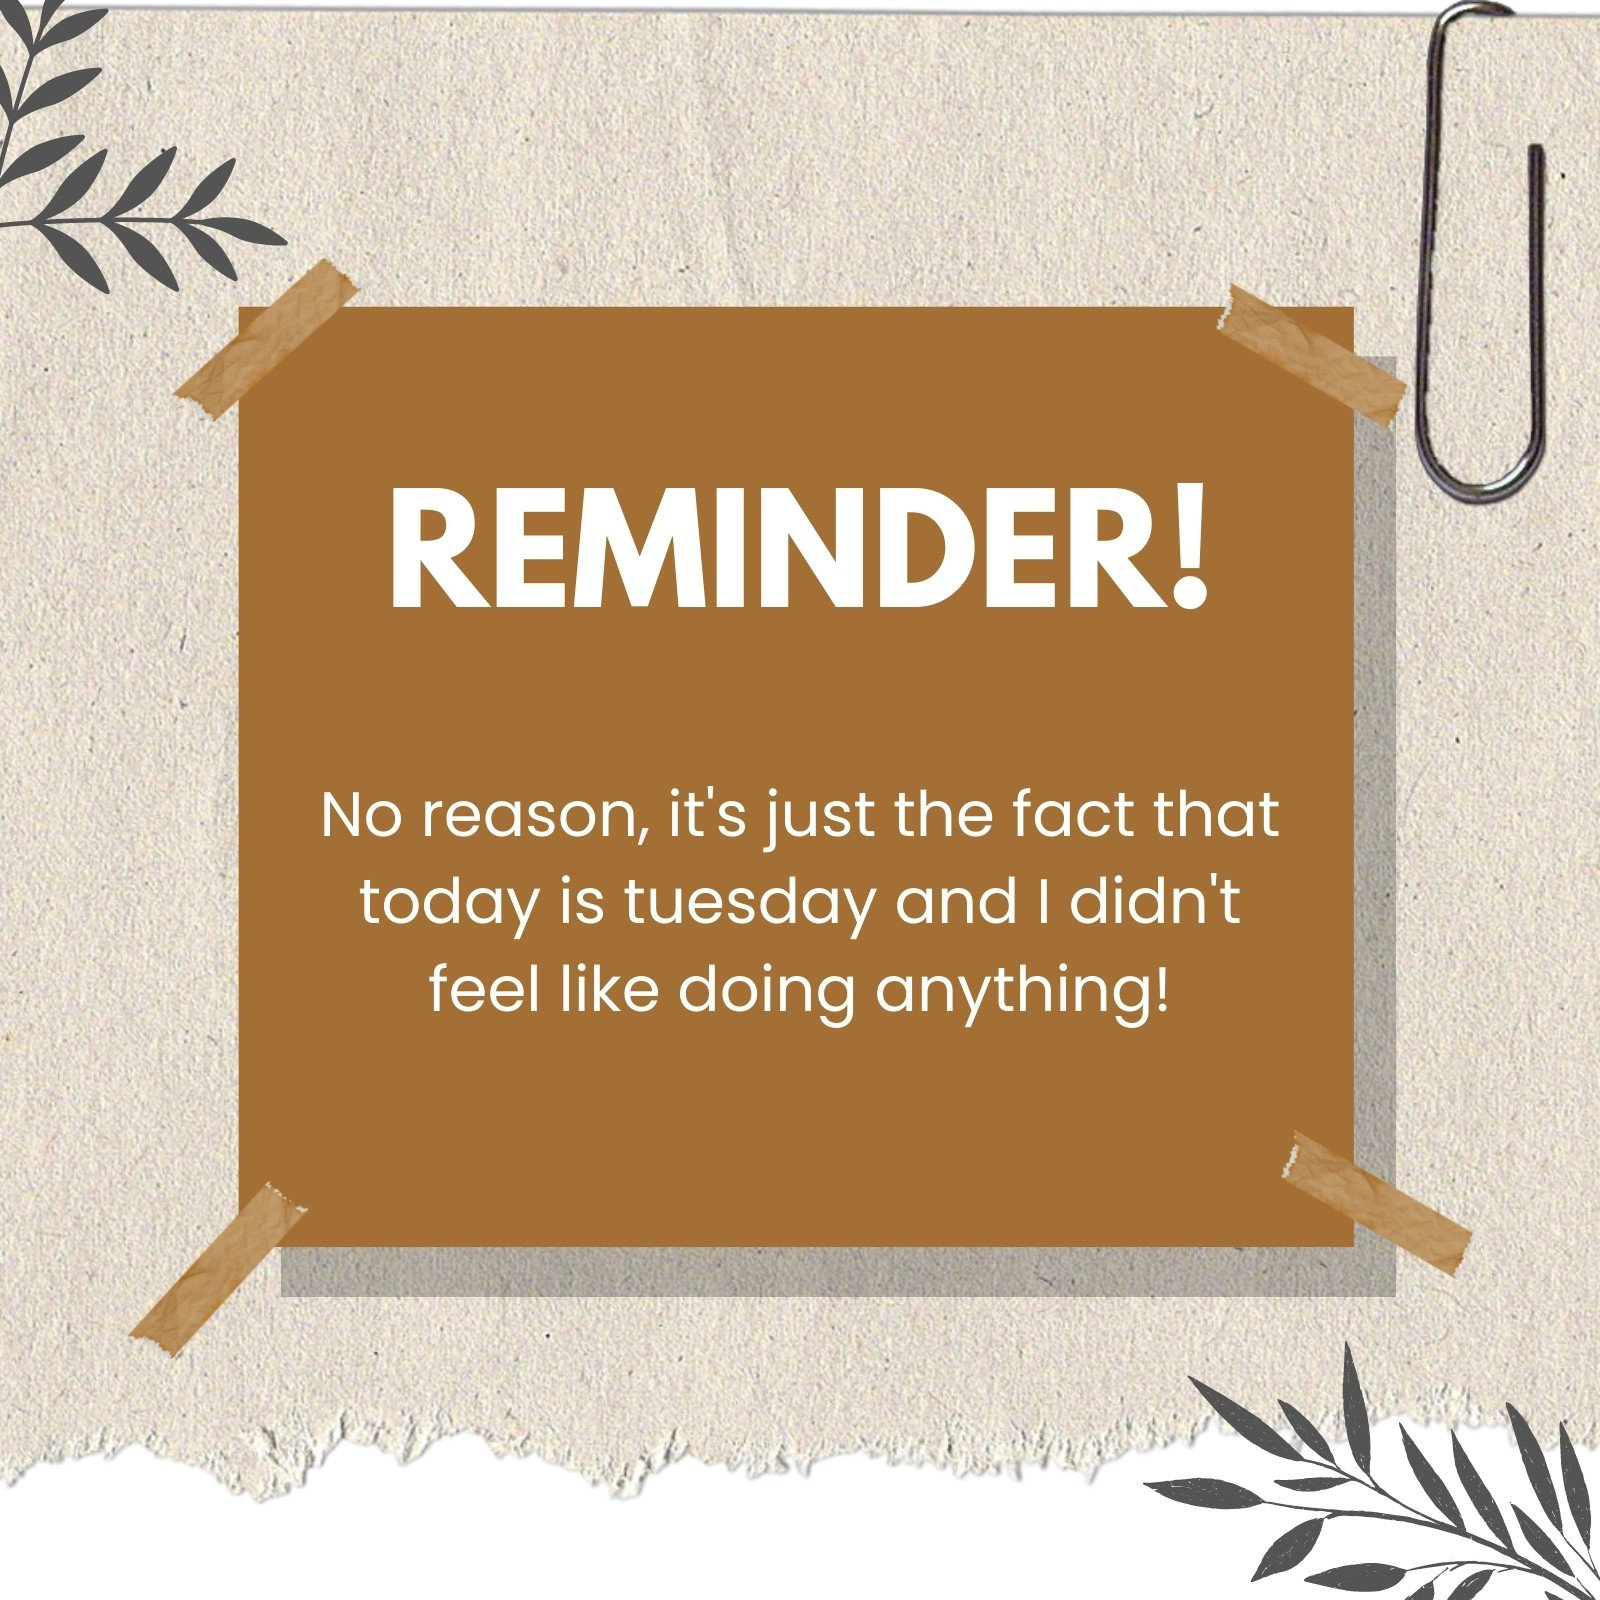 Page 2 - Free And Customizable Reminder Templates - Free Printable Reminder Templates